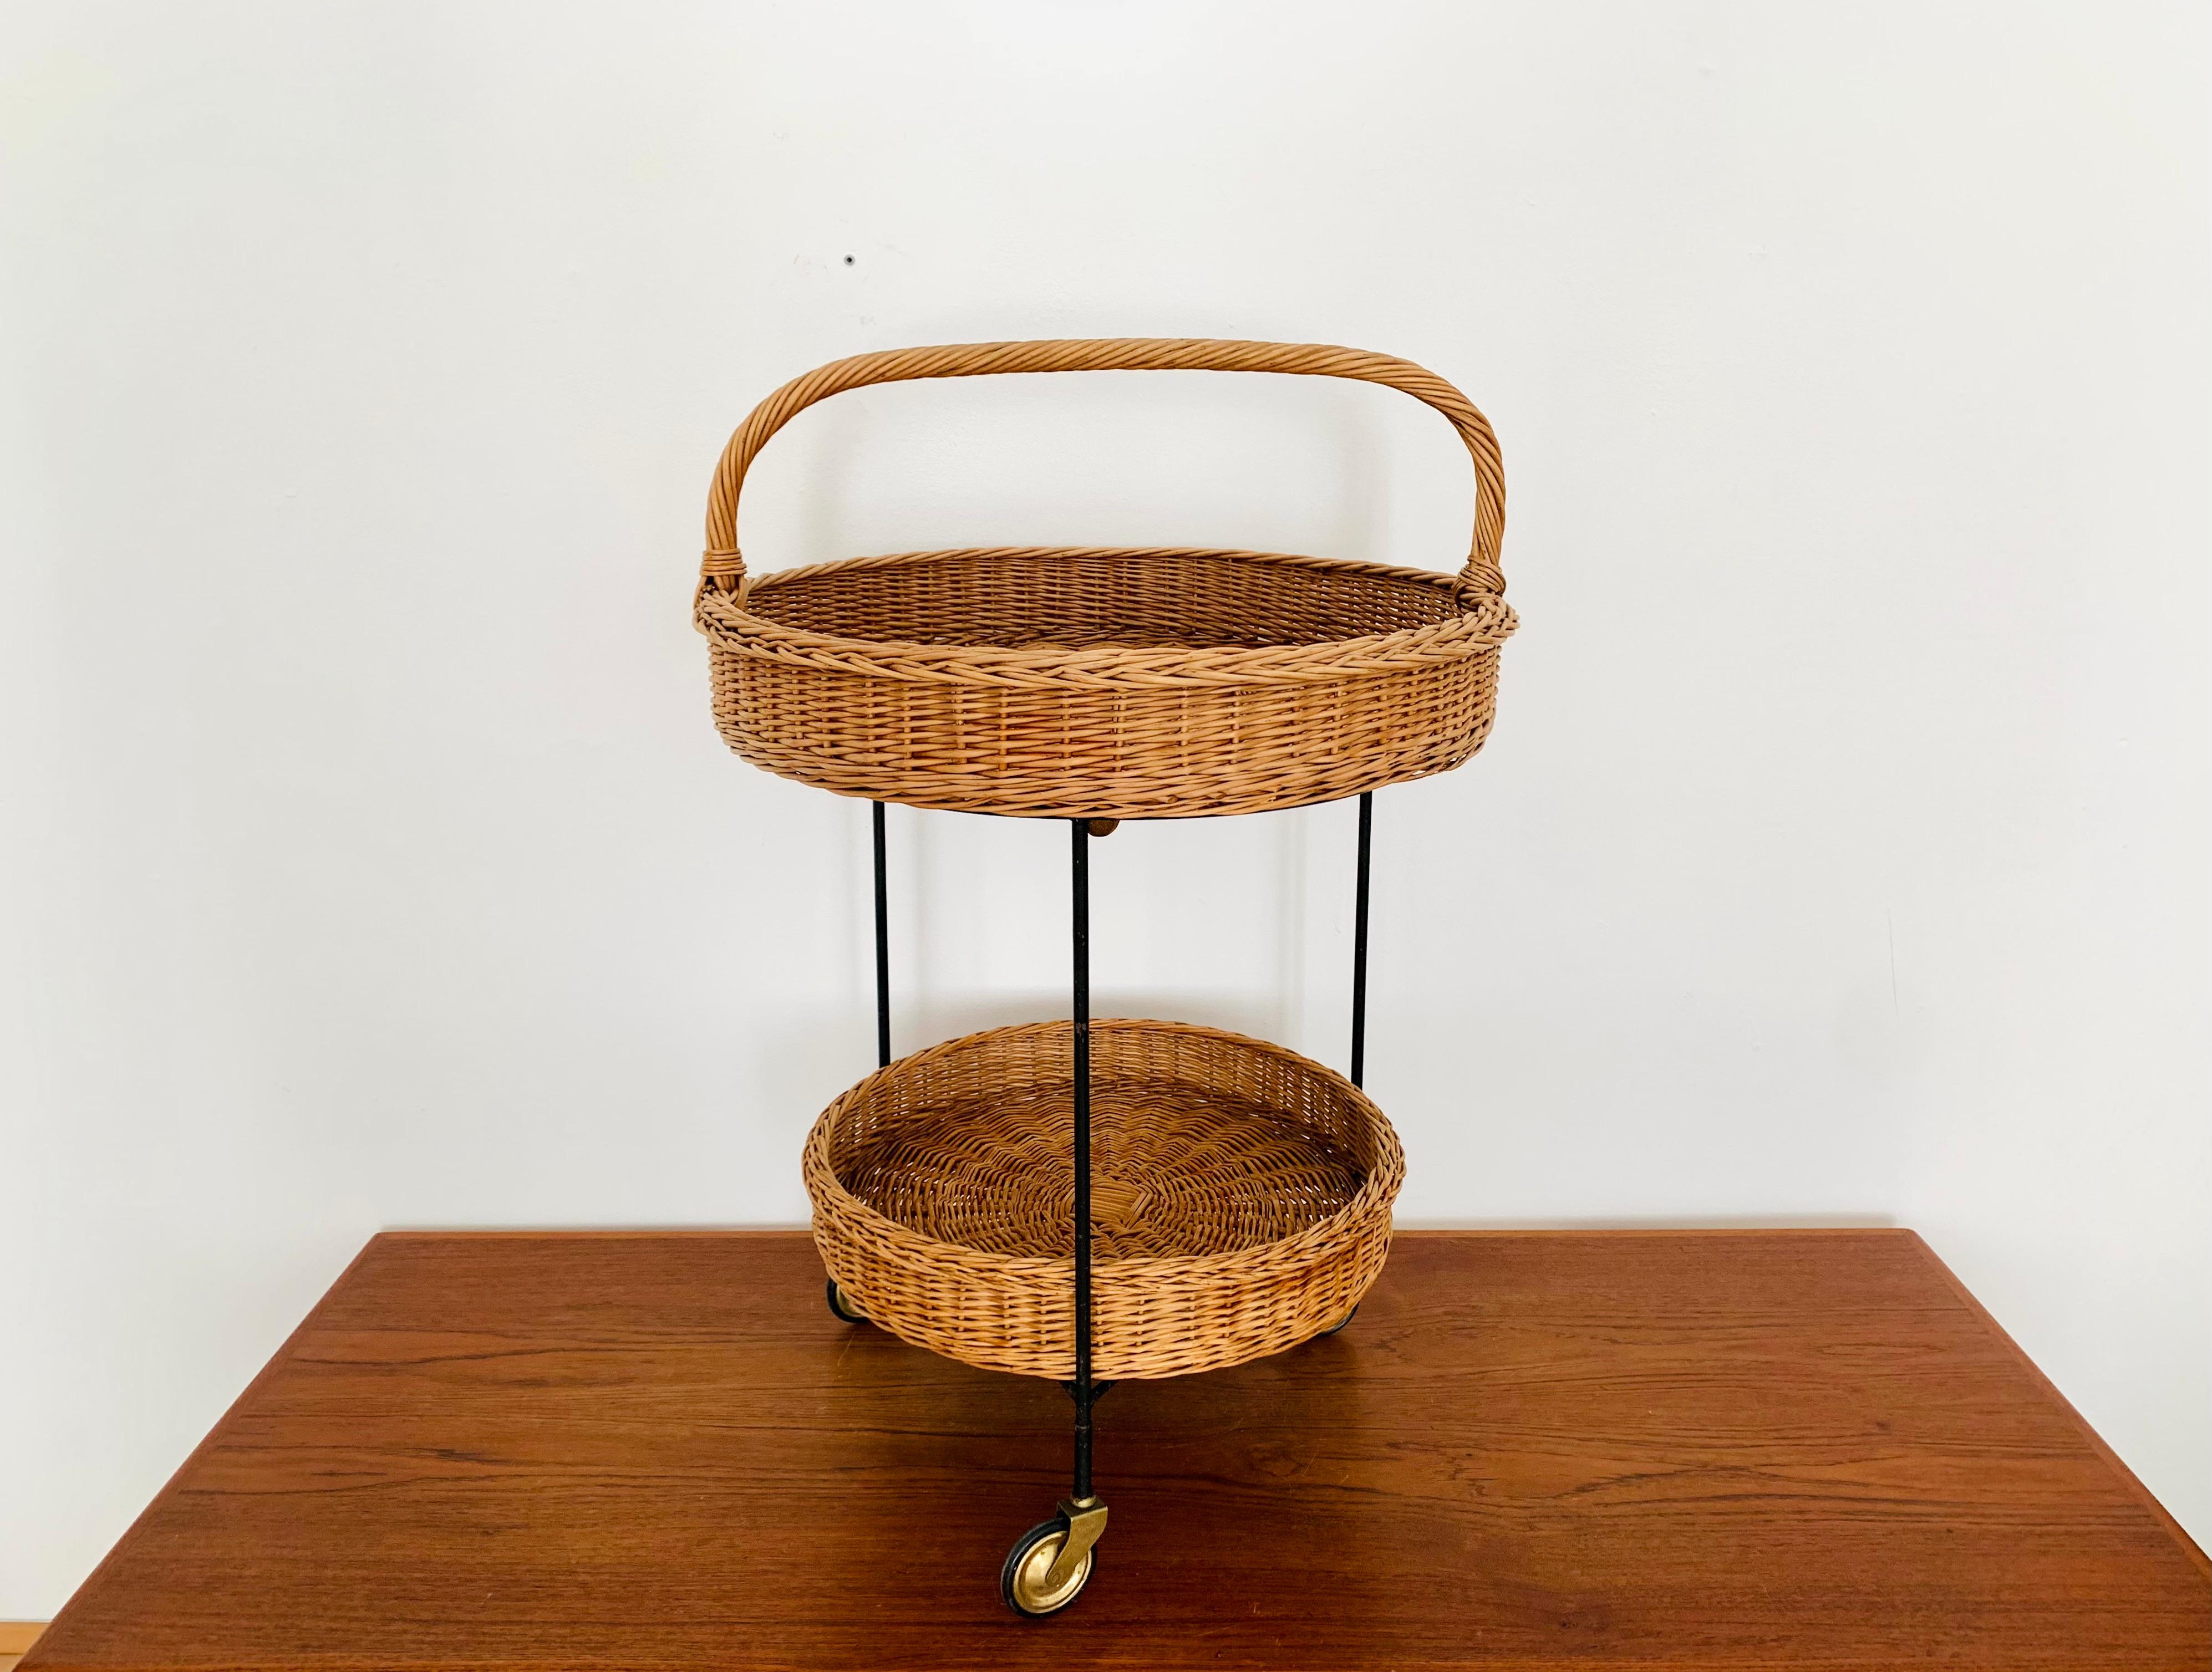 Exceptionally beautiful tea cart or bar cart from the 1950s.
Wonderful design and stable, high-quality workmanship.
The upper basket can also be used as a tray.
The handle is sturdy and makes it easy to carry.
An enrichment for every home and every